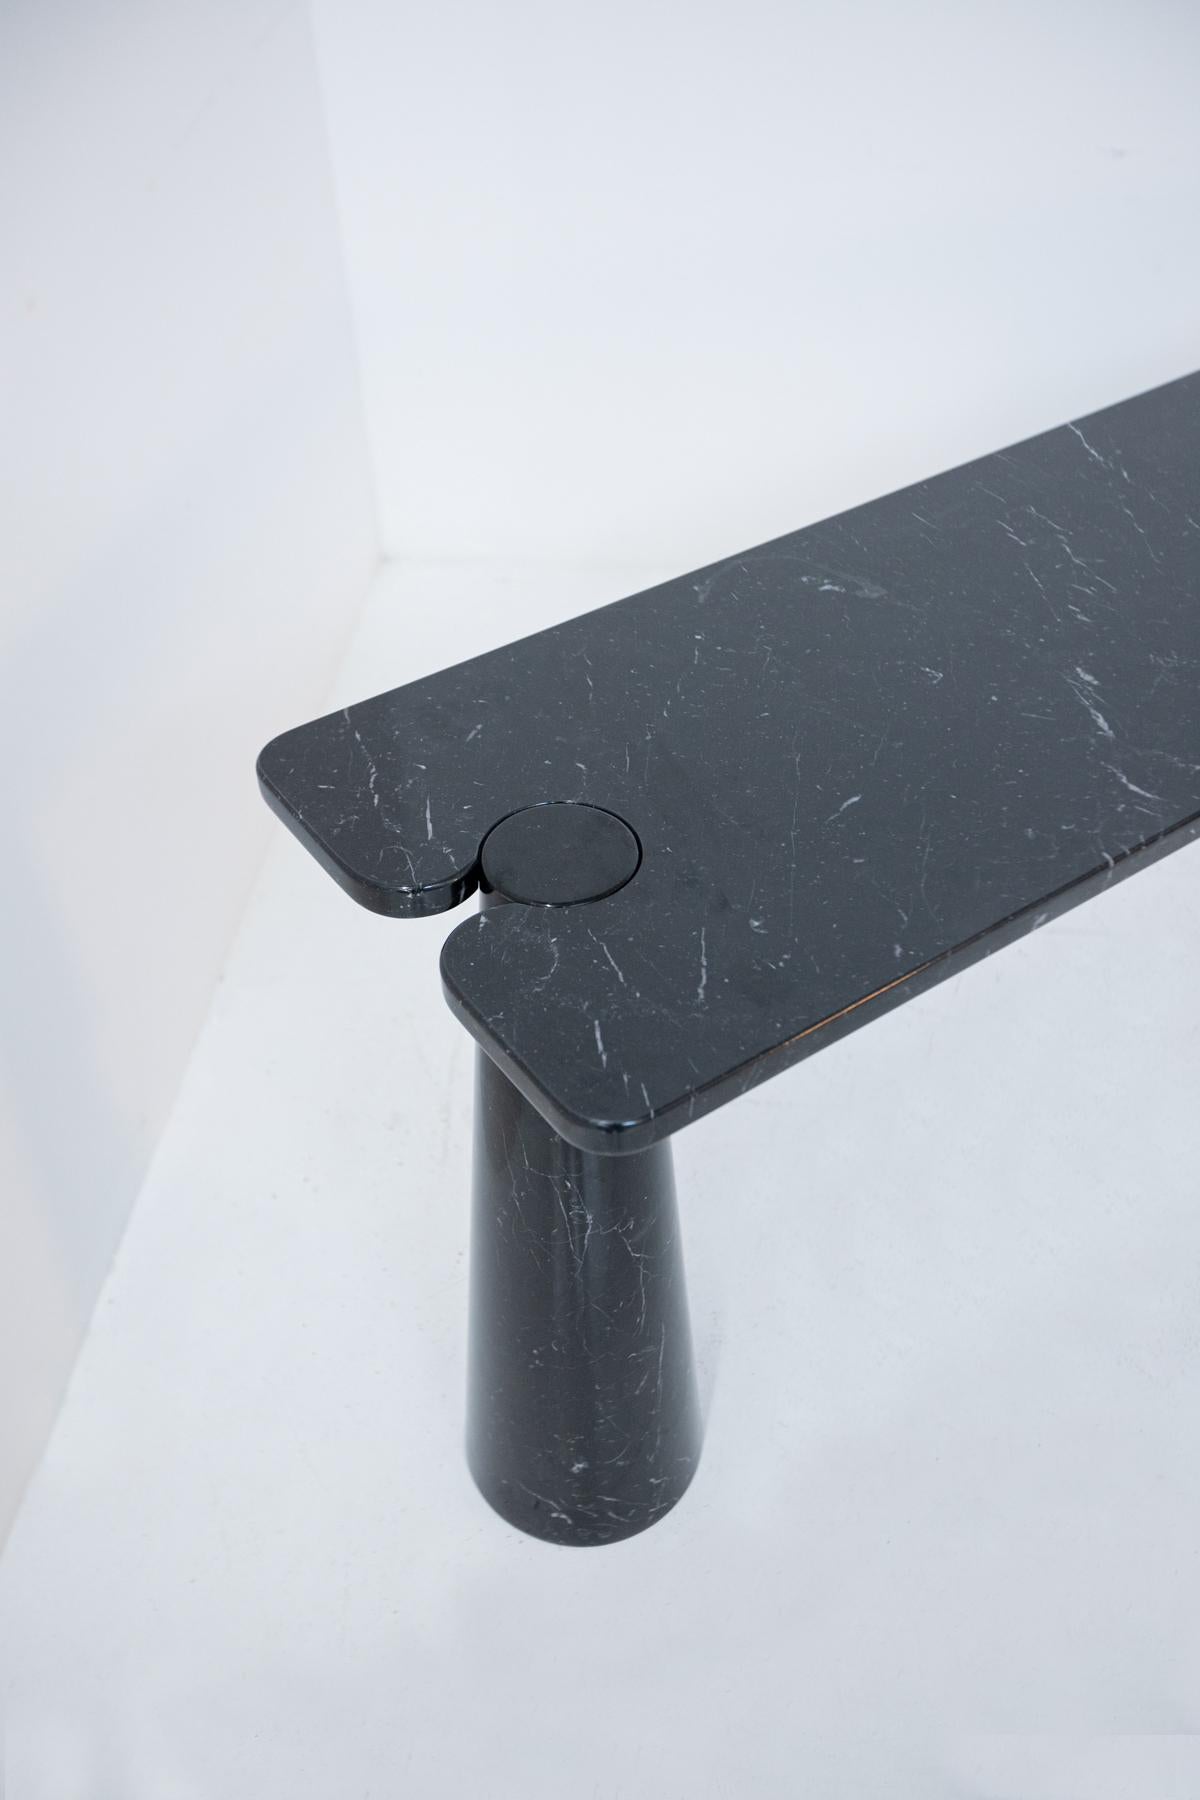 Angelo Mangiarotti Consolle Table in Black Marble for Skipper, 1970 2